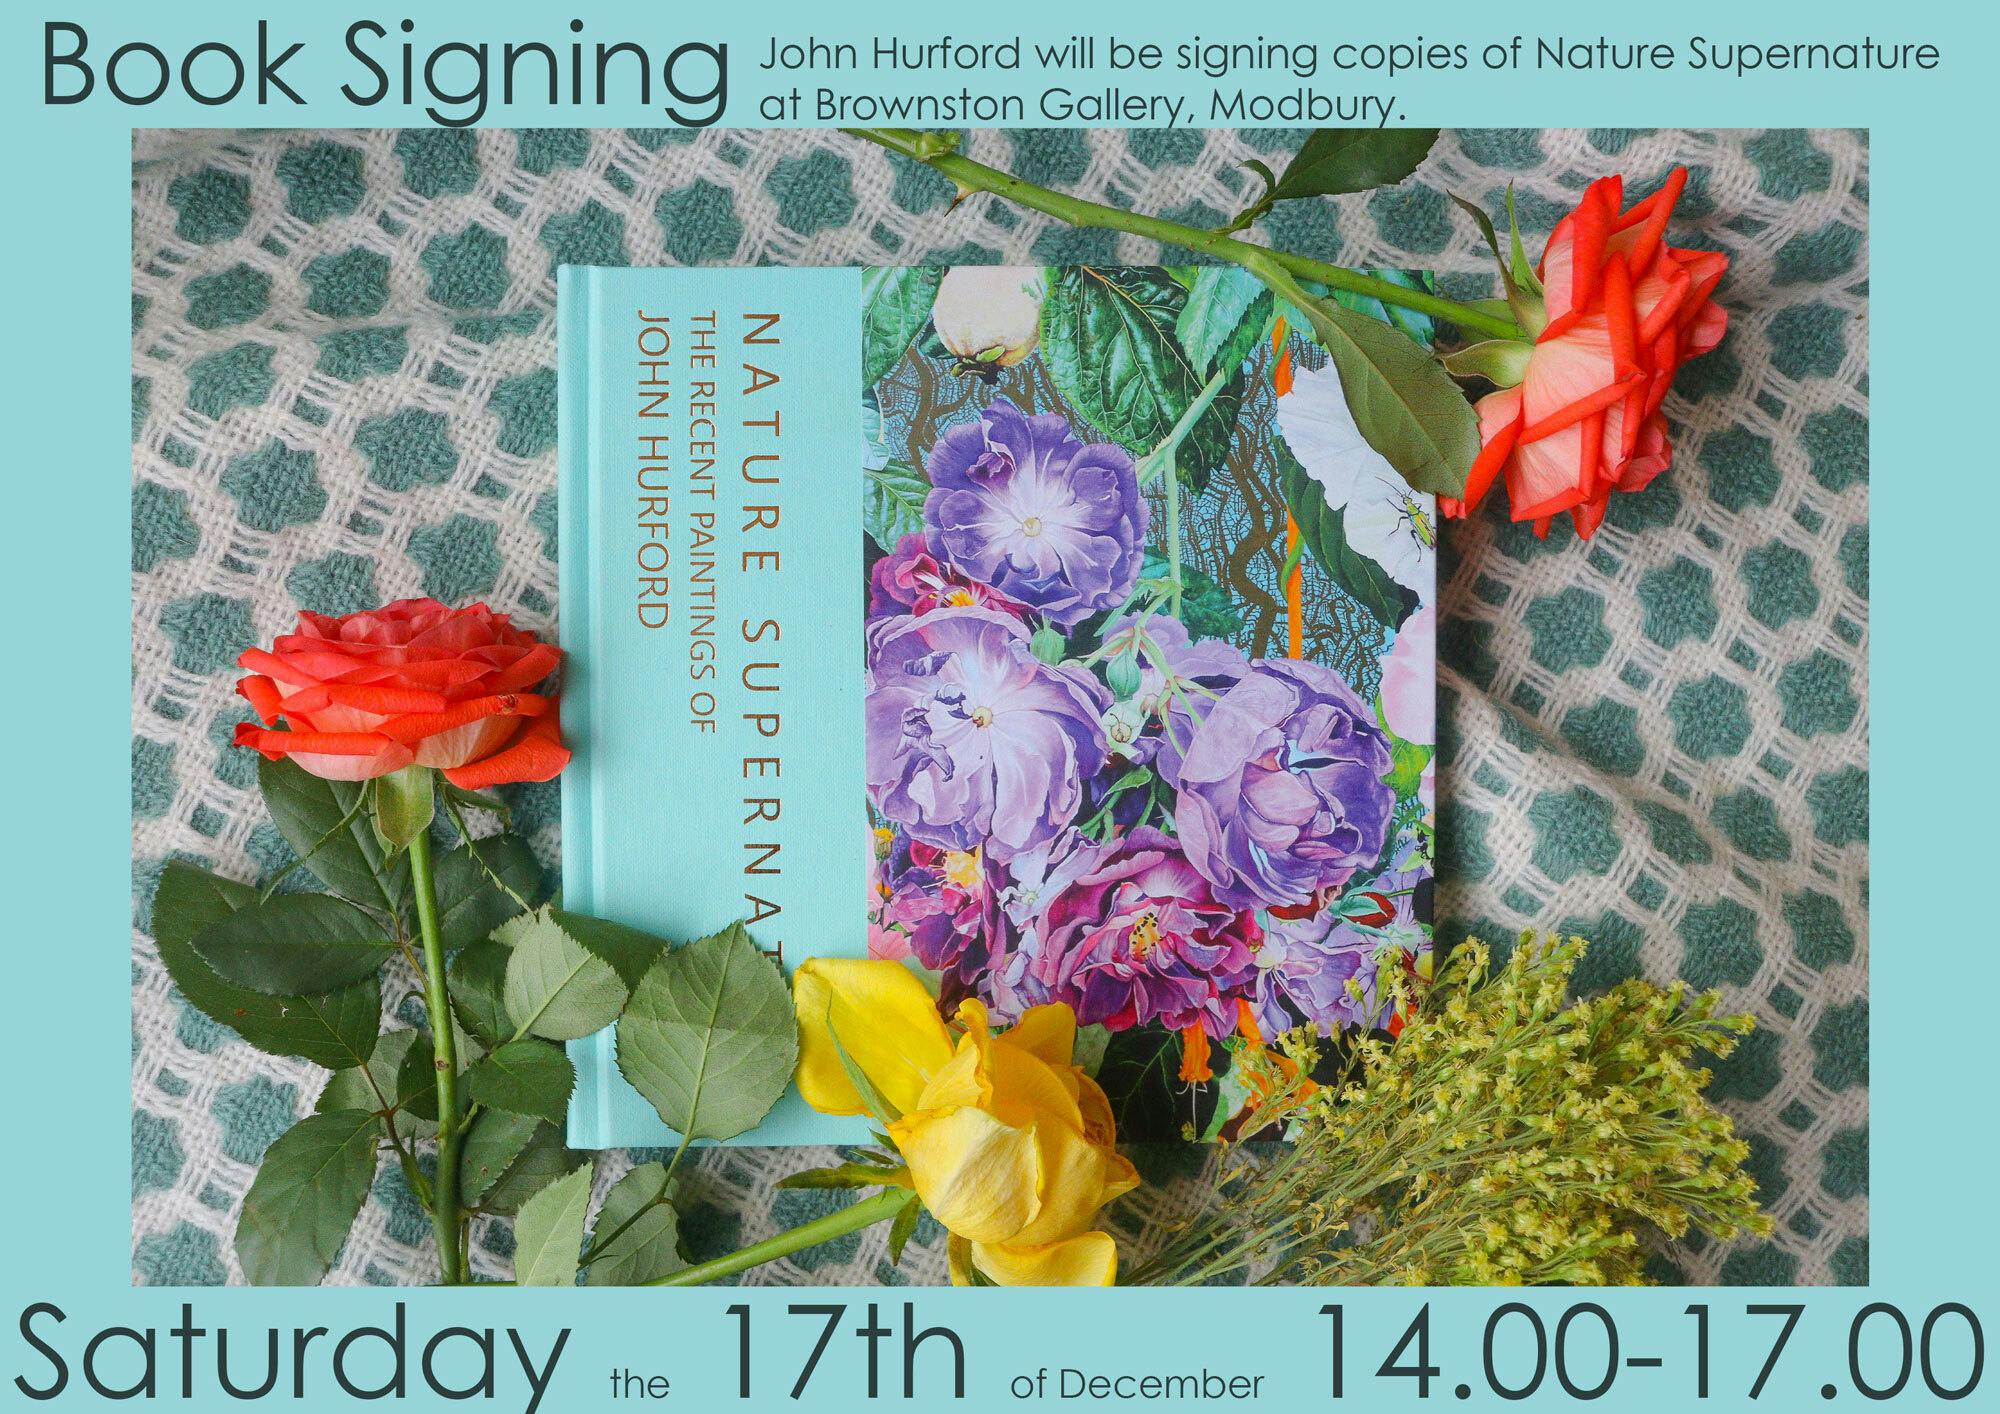 Book signing poster designed by Hannah